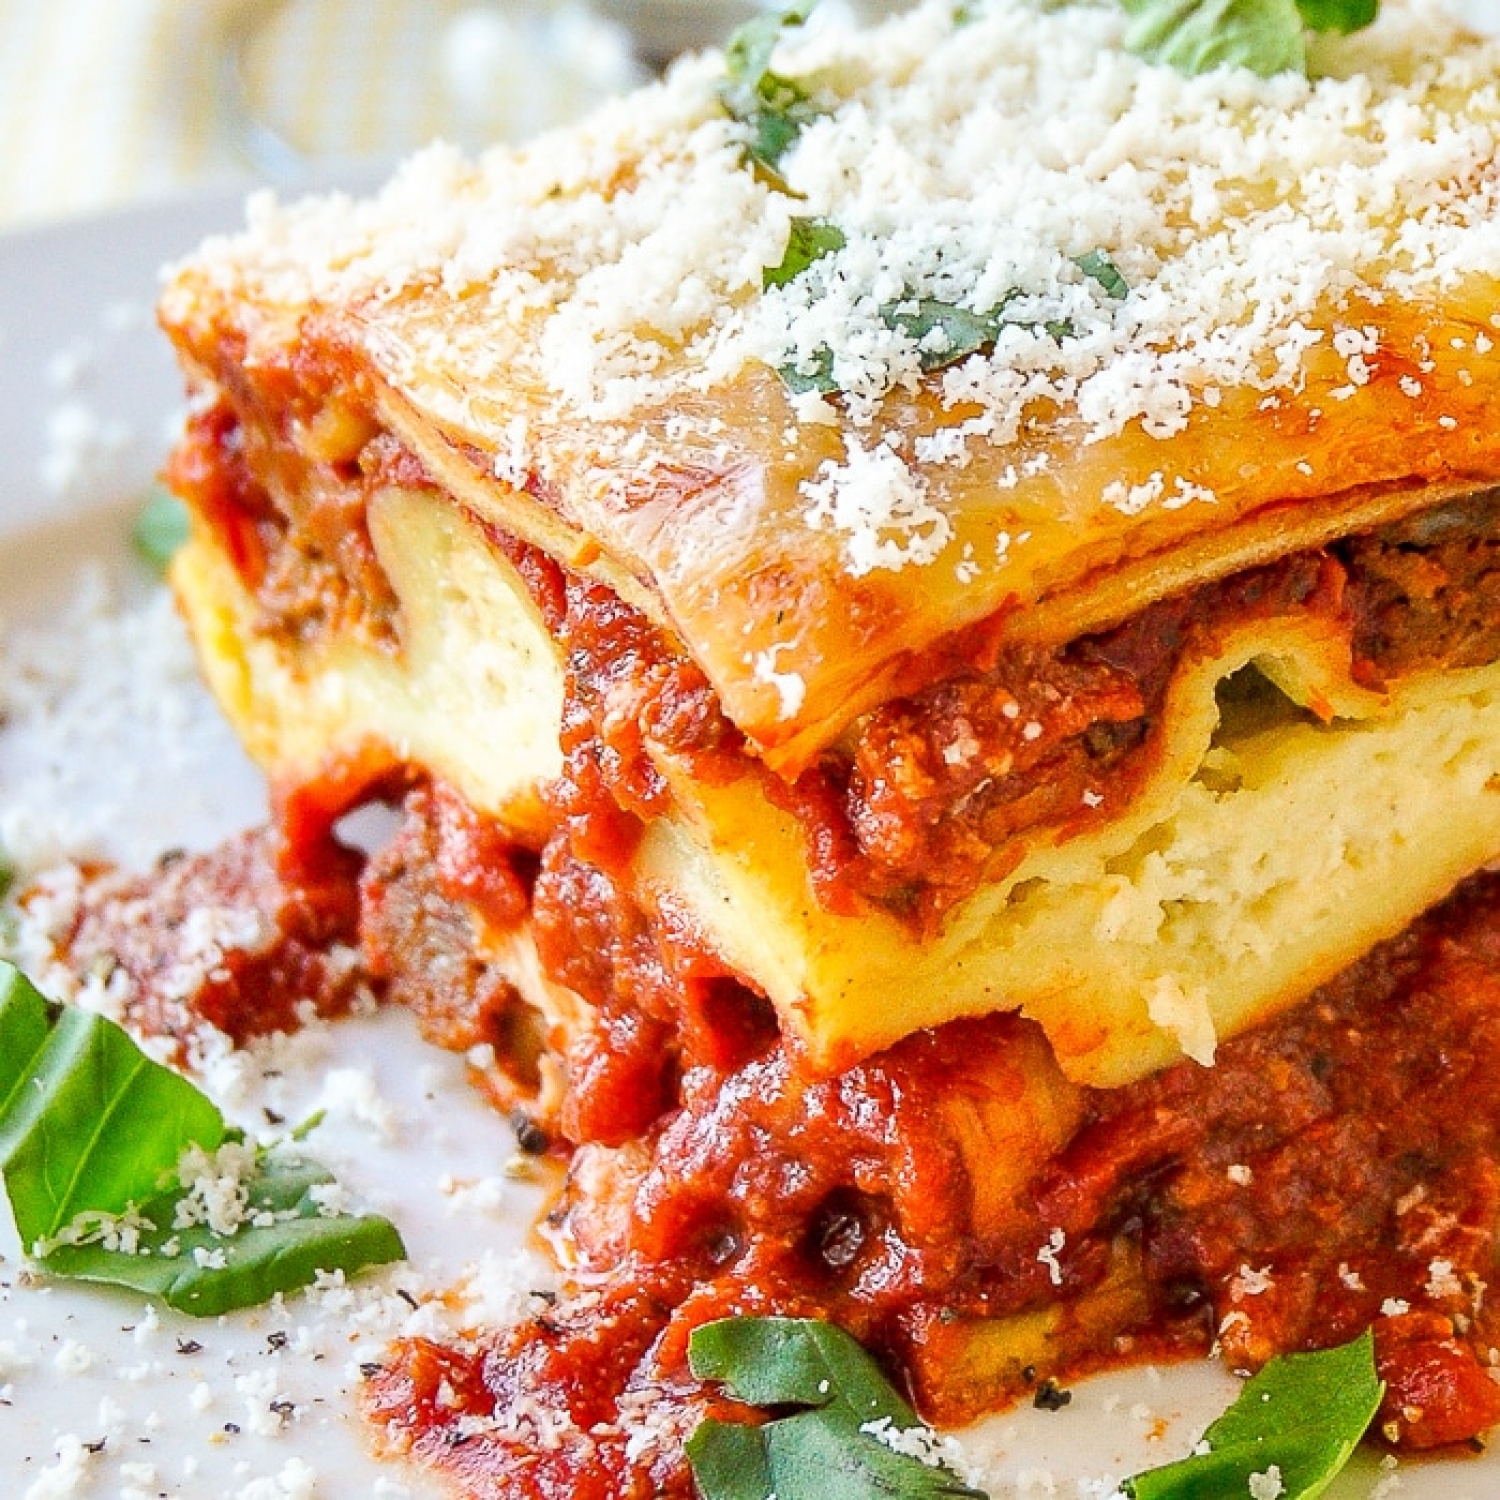 Comforting & Creative Lasagna Recipes To Feed a Crowd